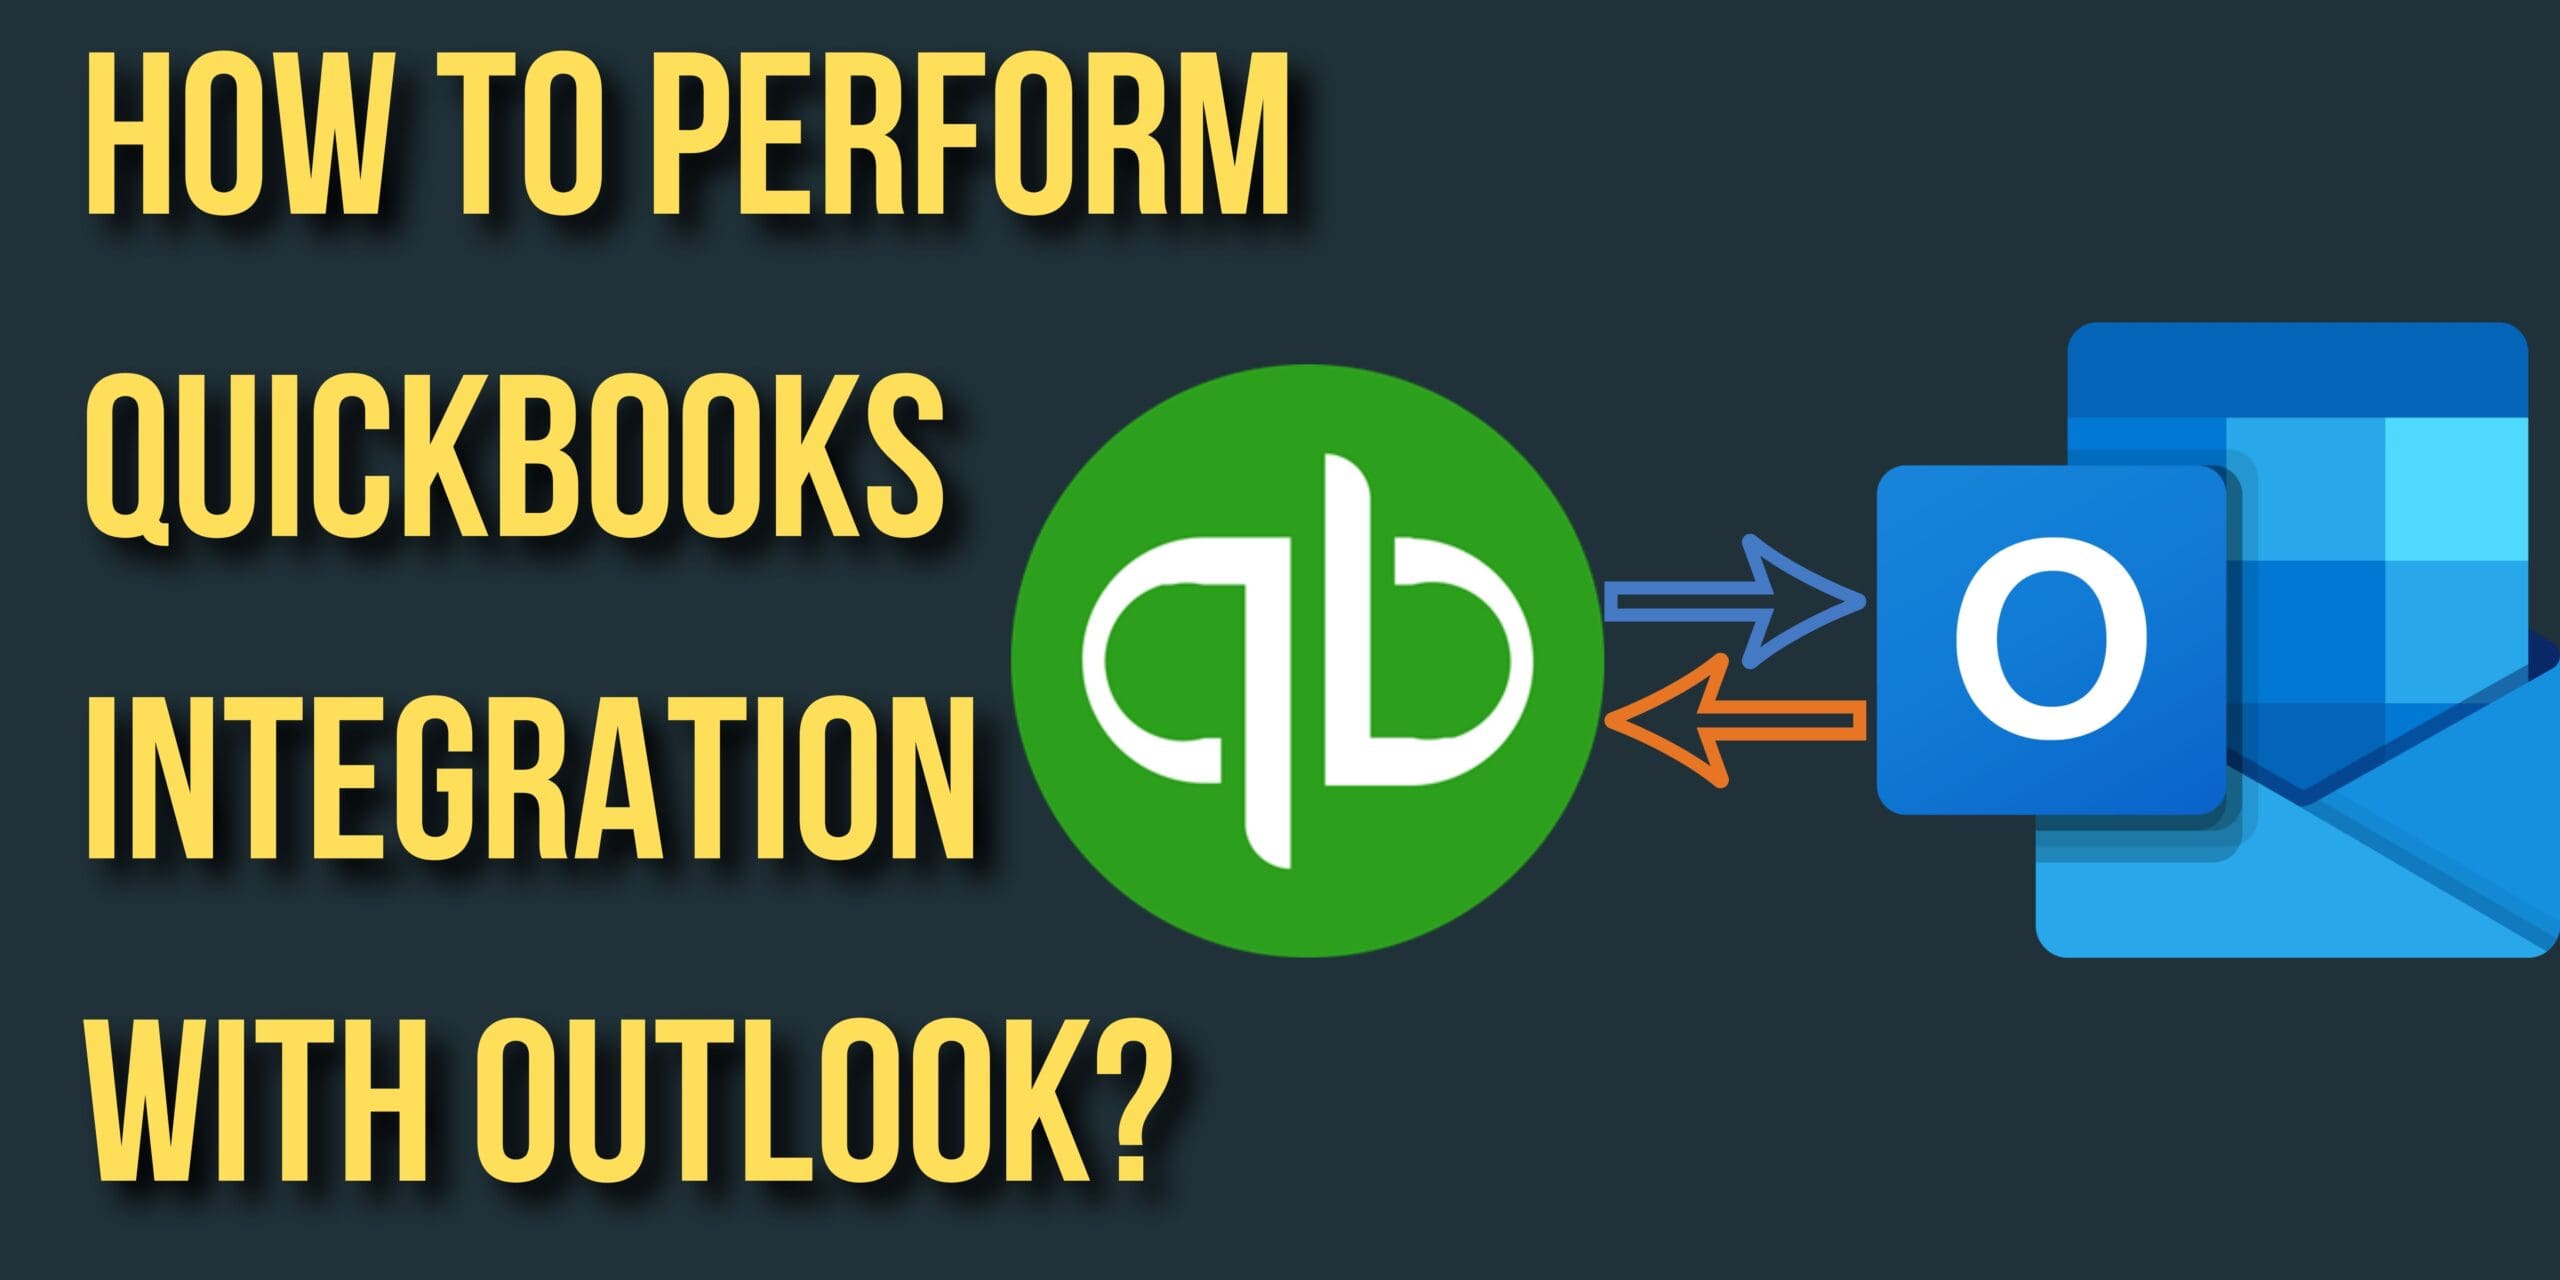 How To Perform QuickBooks Integration With Outlook?